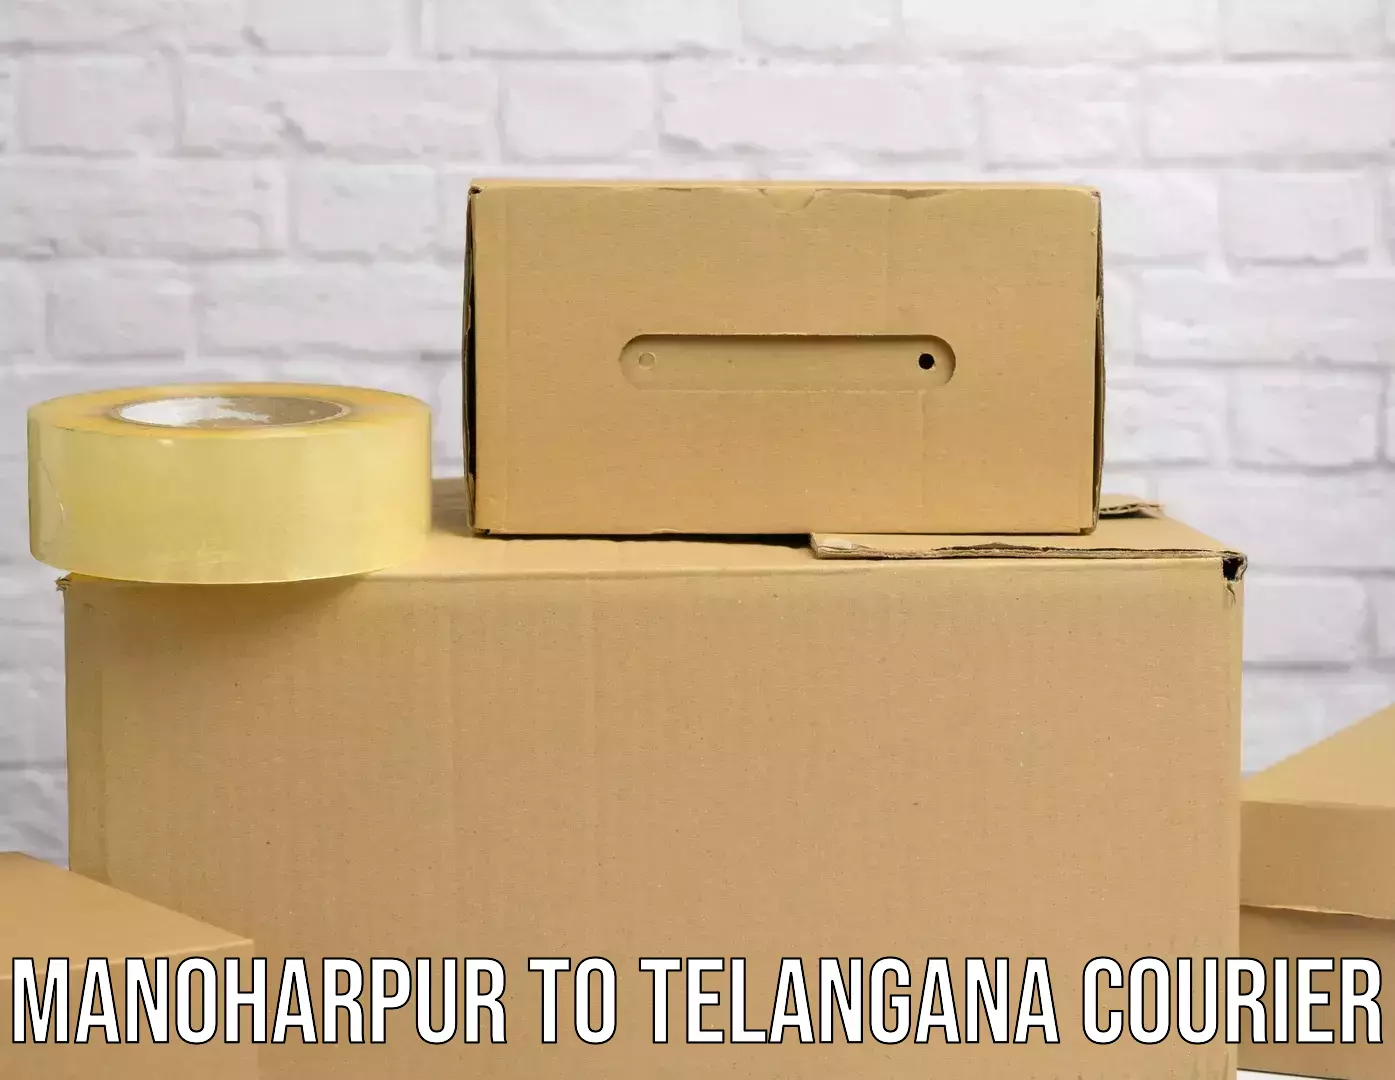 Discounted shipping Manoharpur to Secunderabad